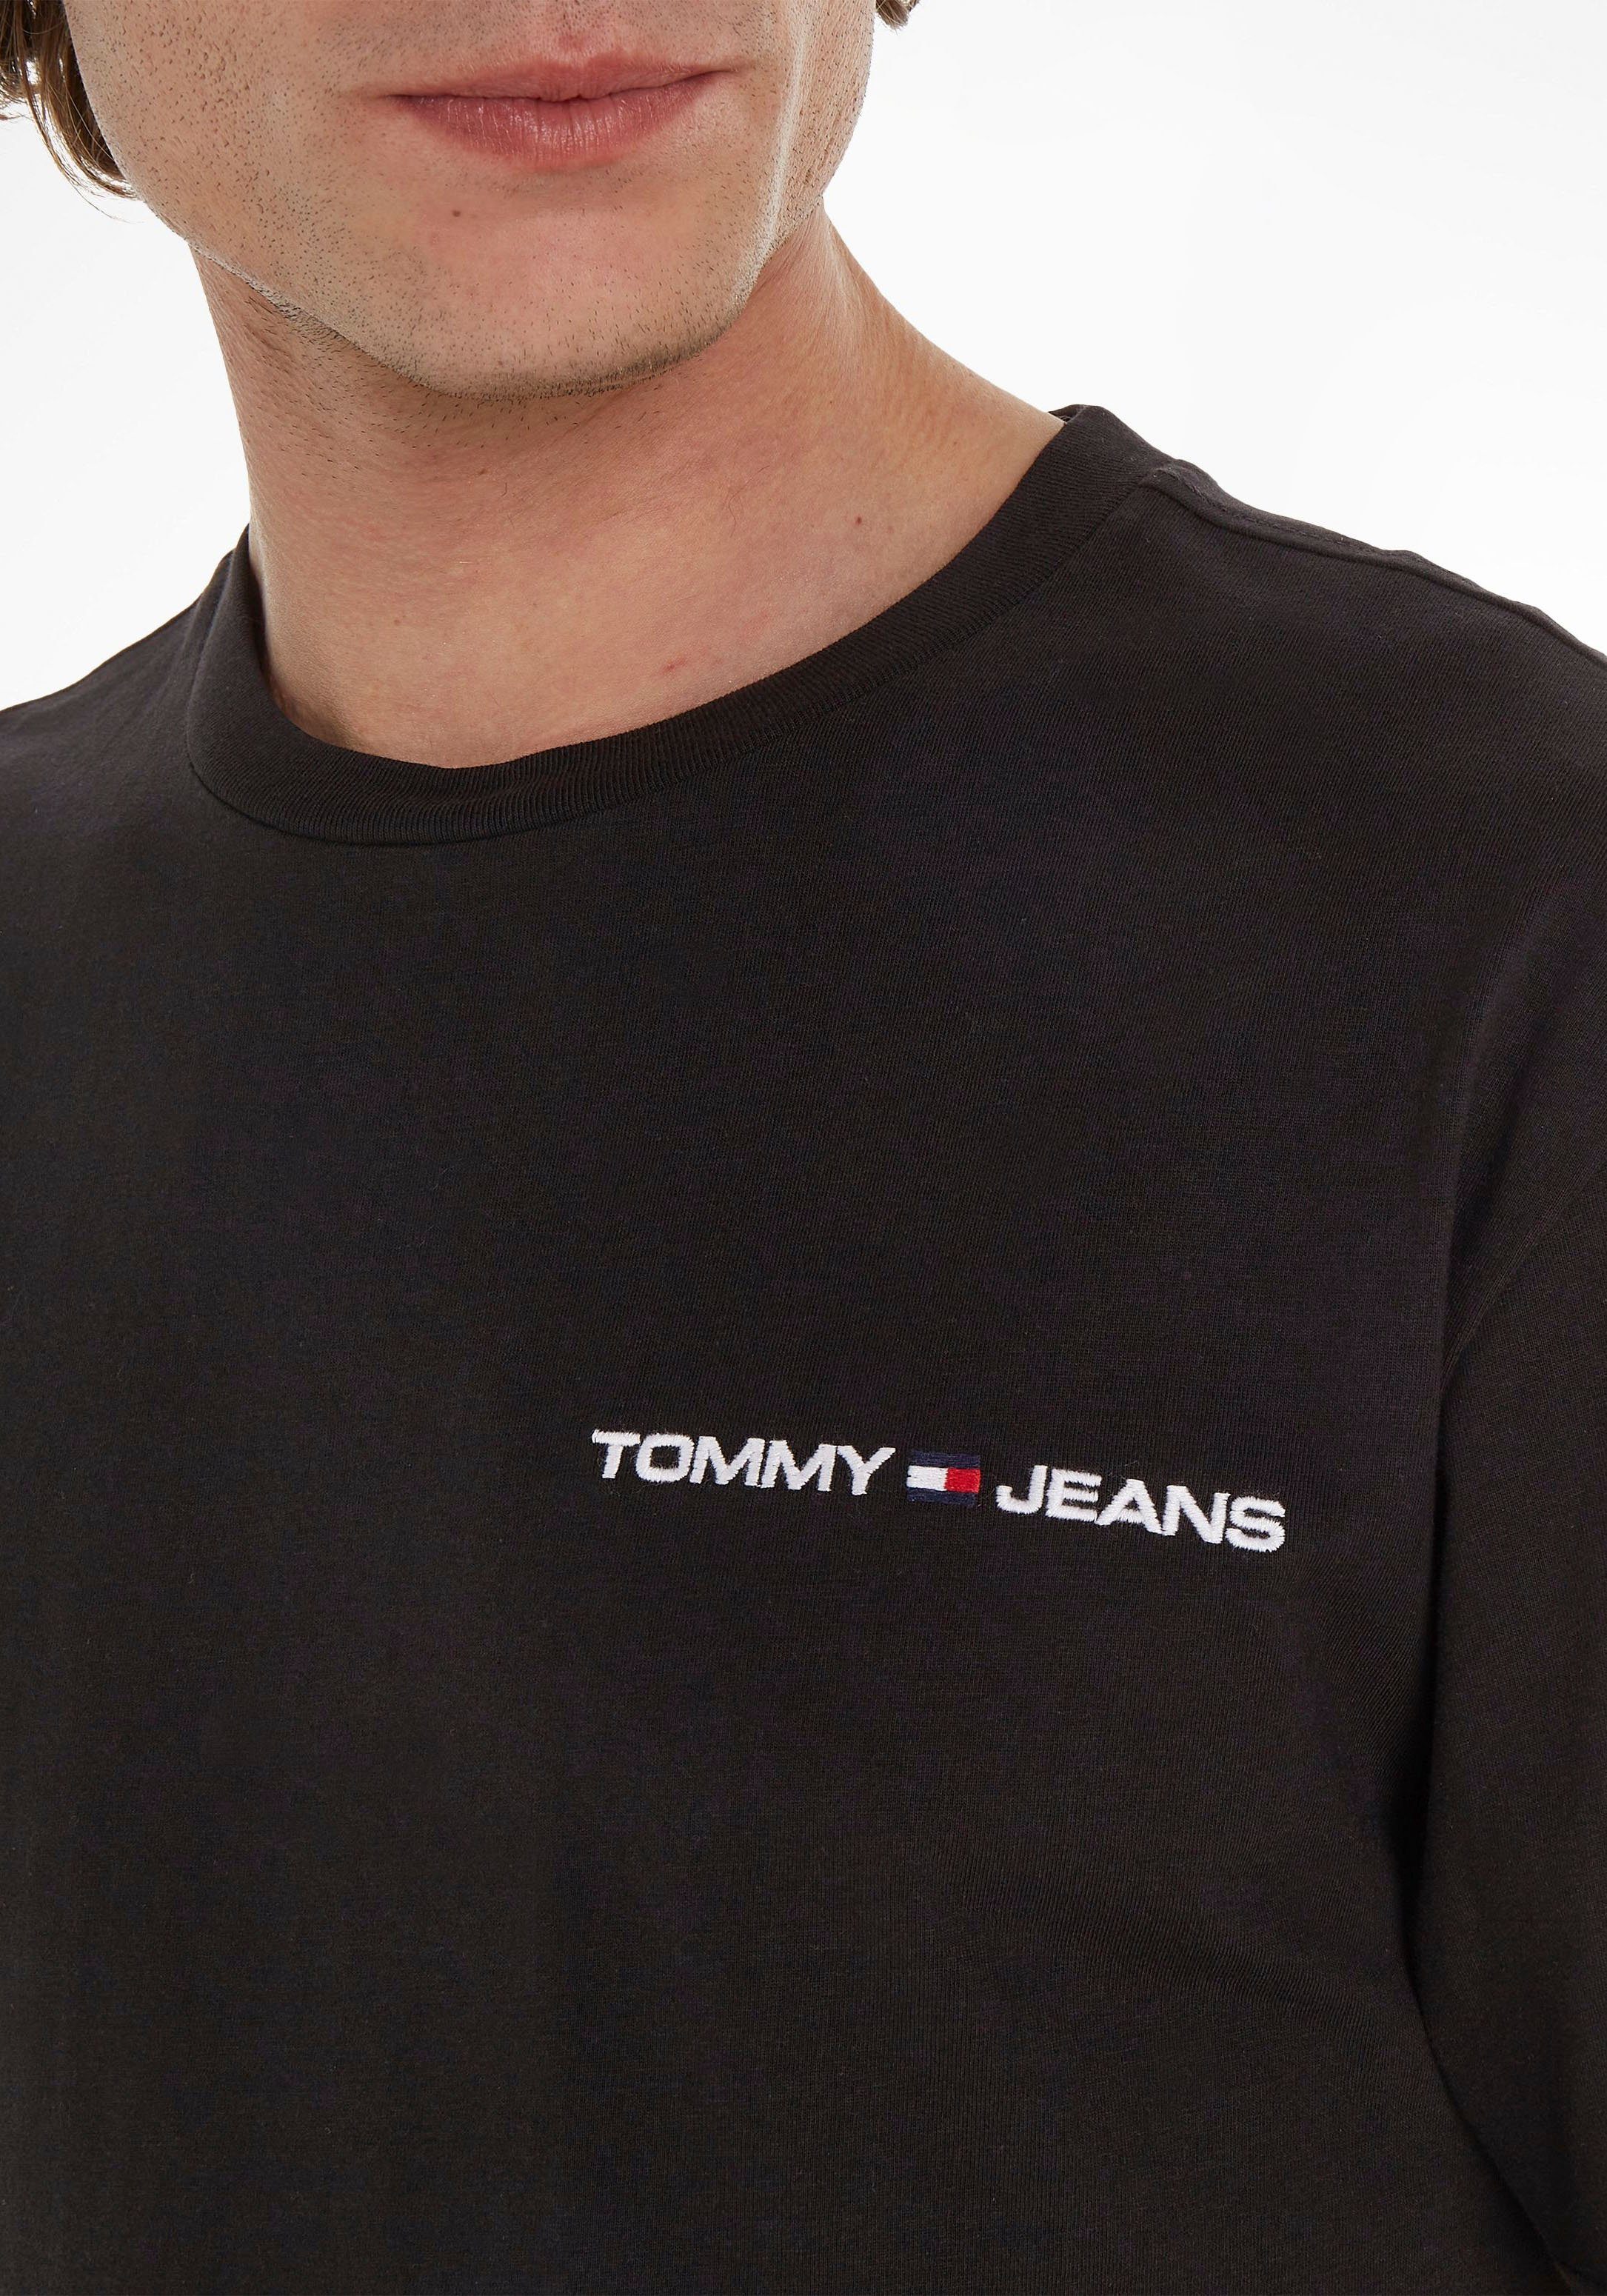 CHEST LINEAR Tommy CLSC T-Shirt Black TJM Jeans TEE